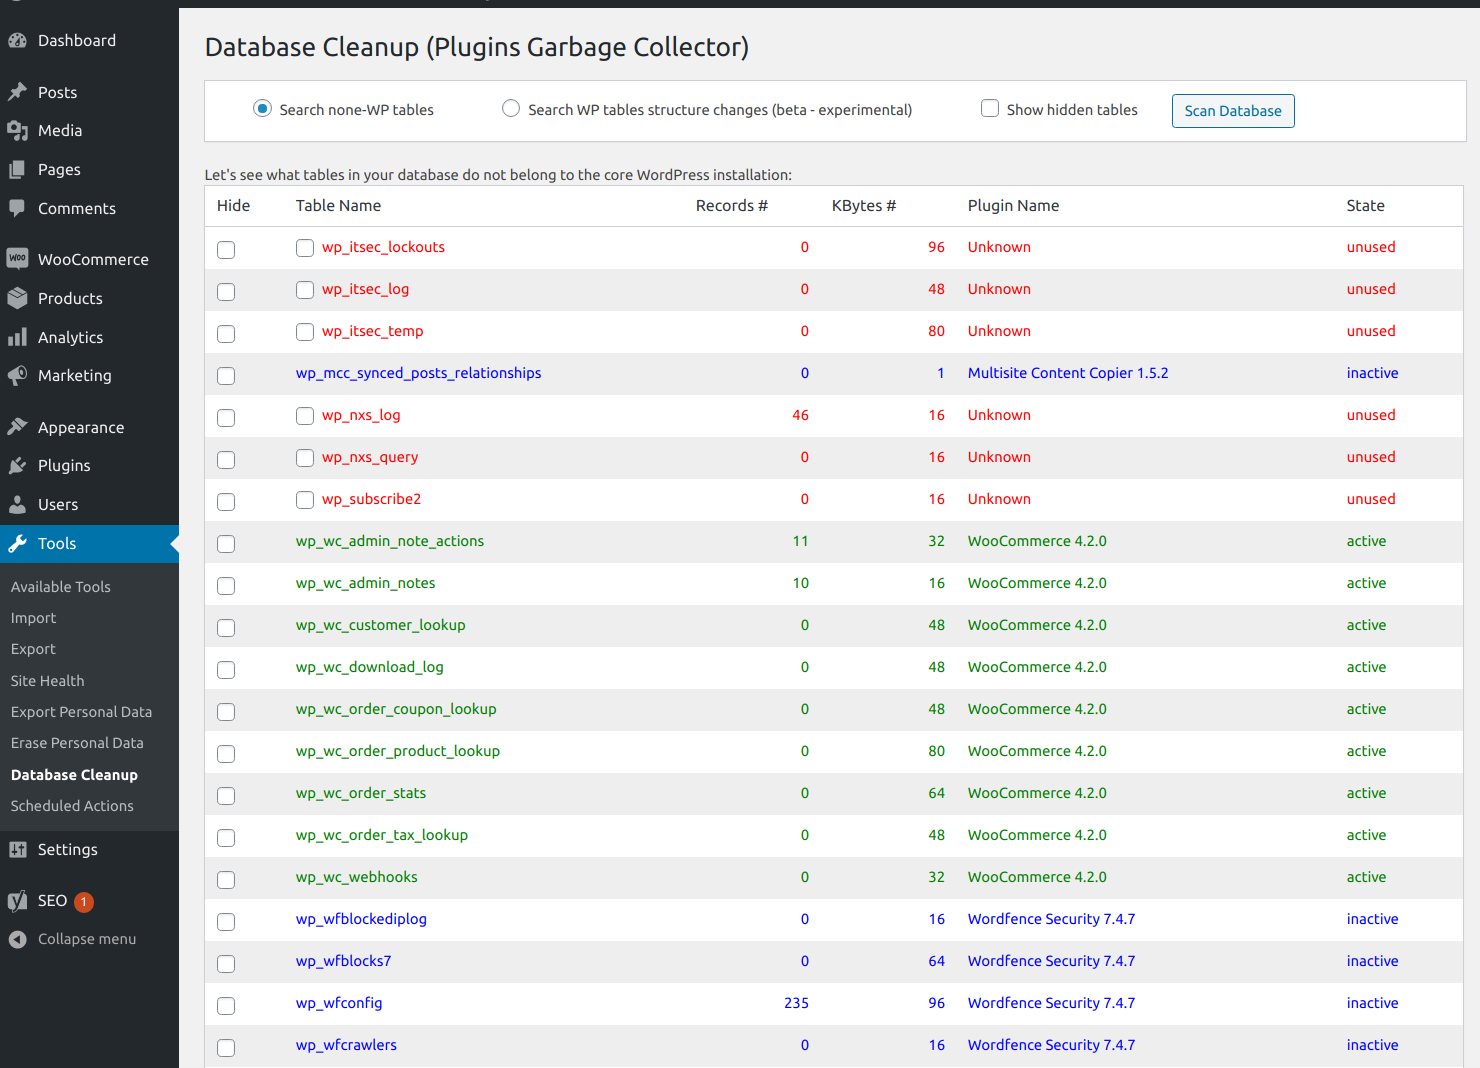 screenshot-1.png Plugins Garbage Collector scan action results.